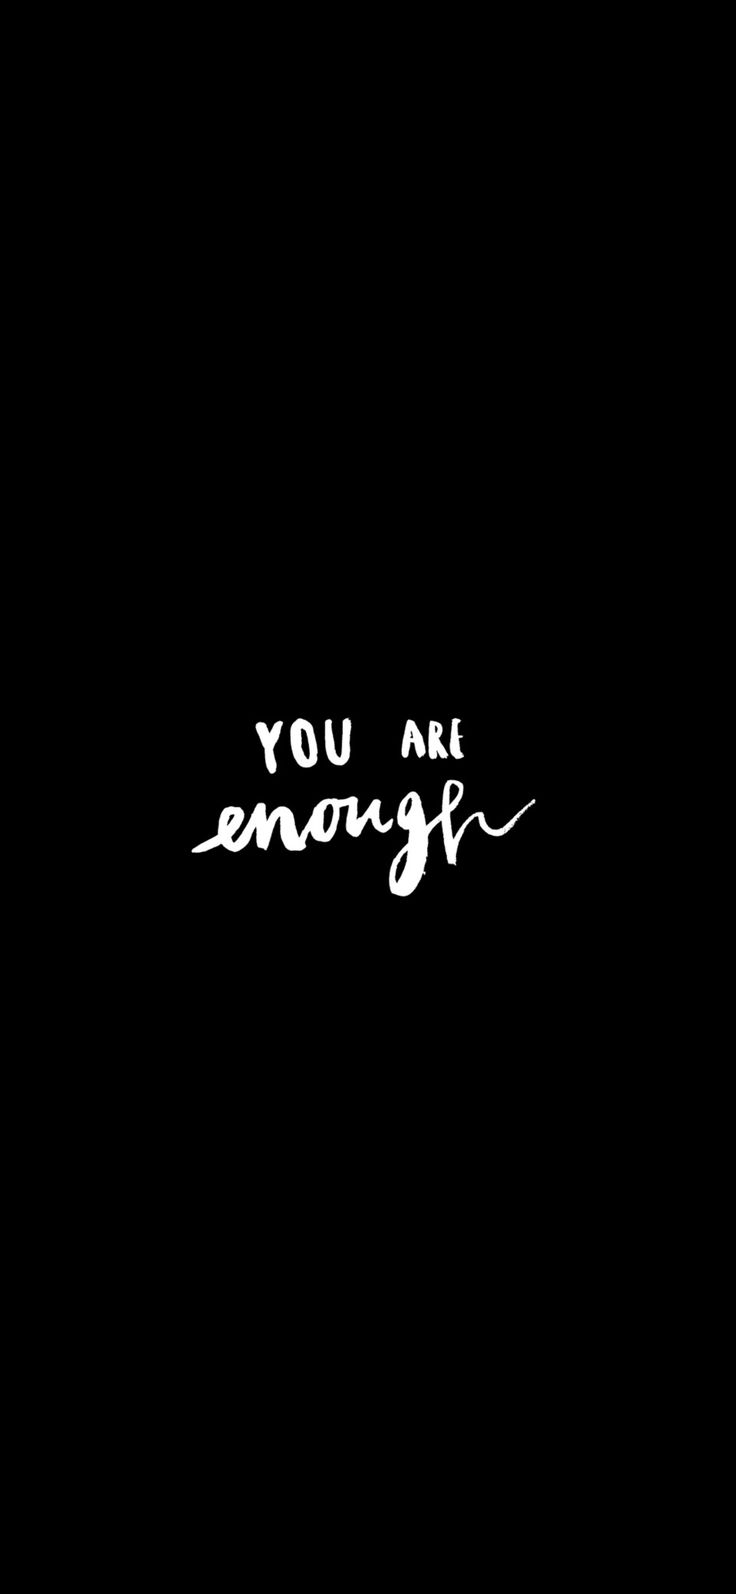 Black wallpaper Boss up quotes You are enough quote You are enough